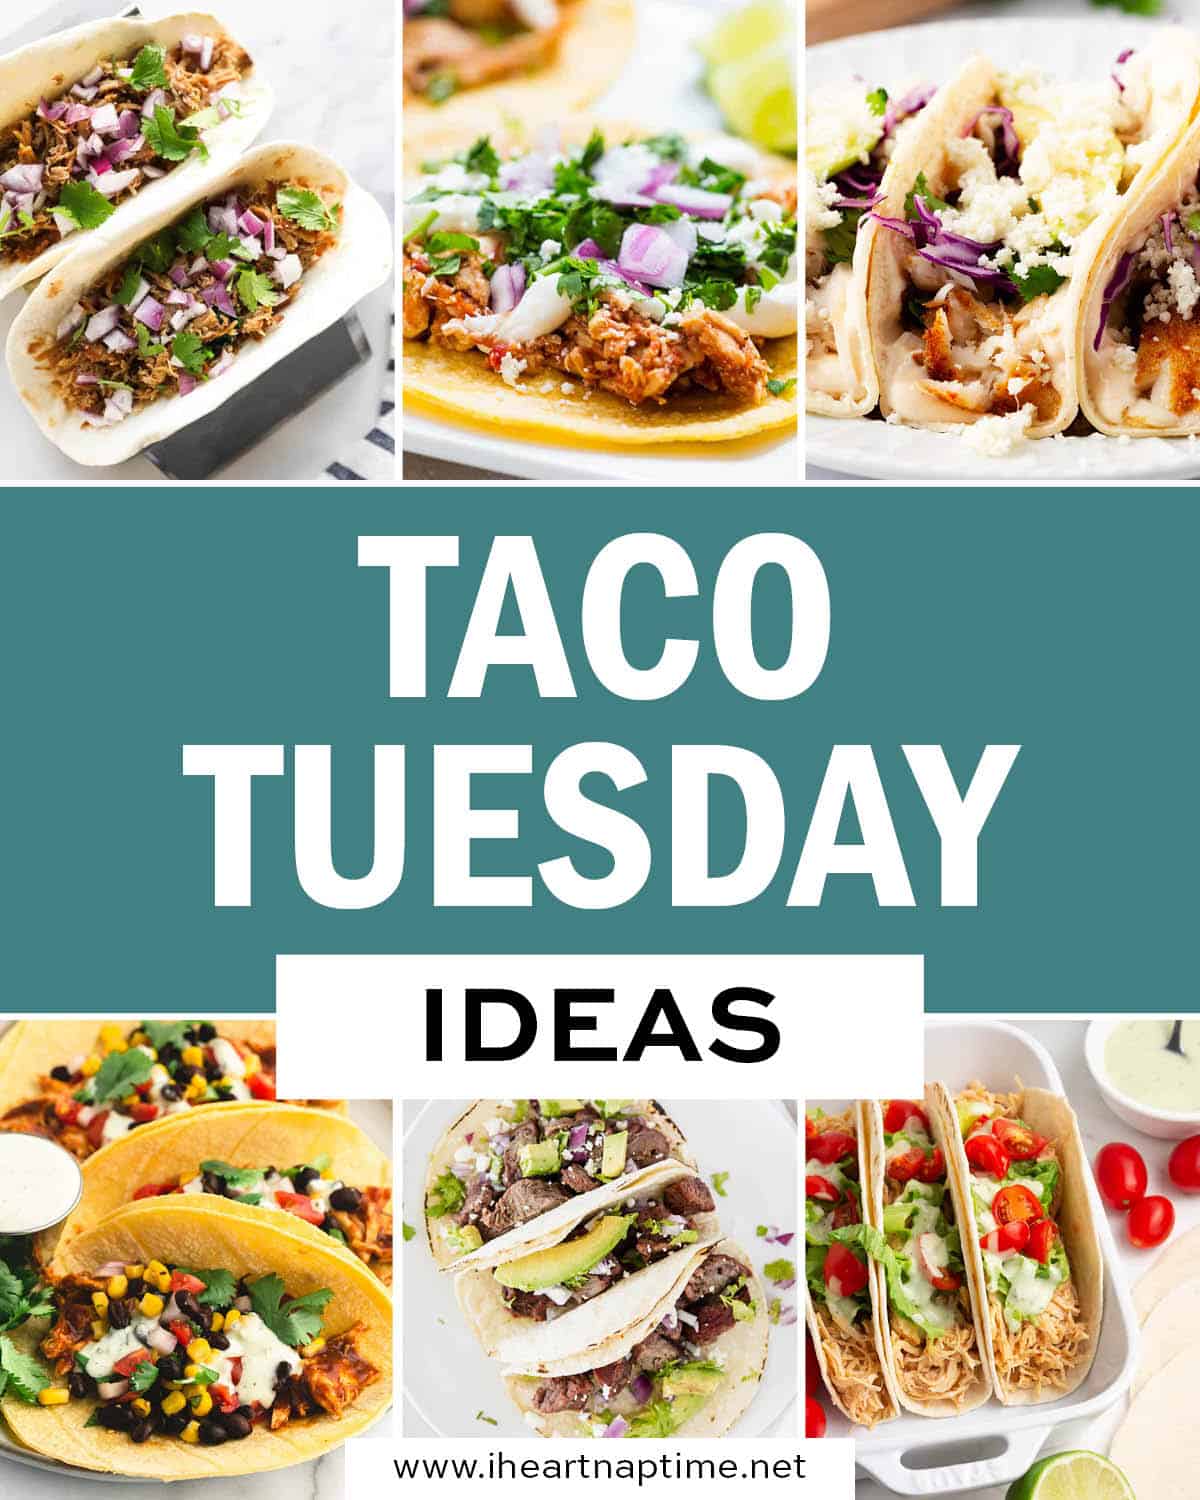 A collage of photos with taco Tuesday recipes.